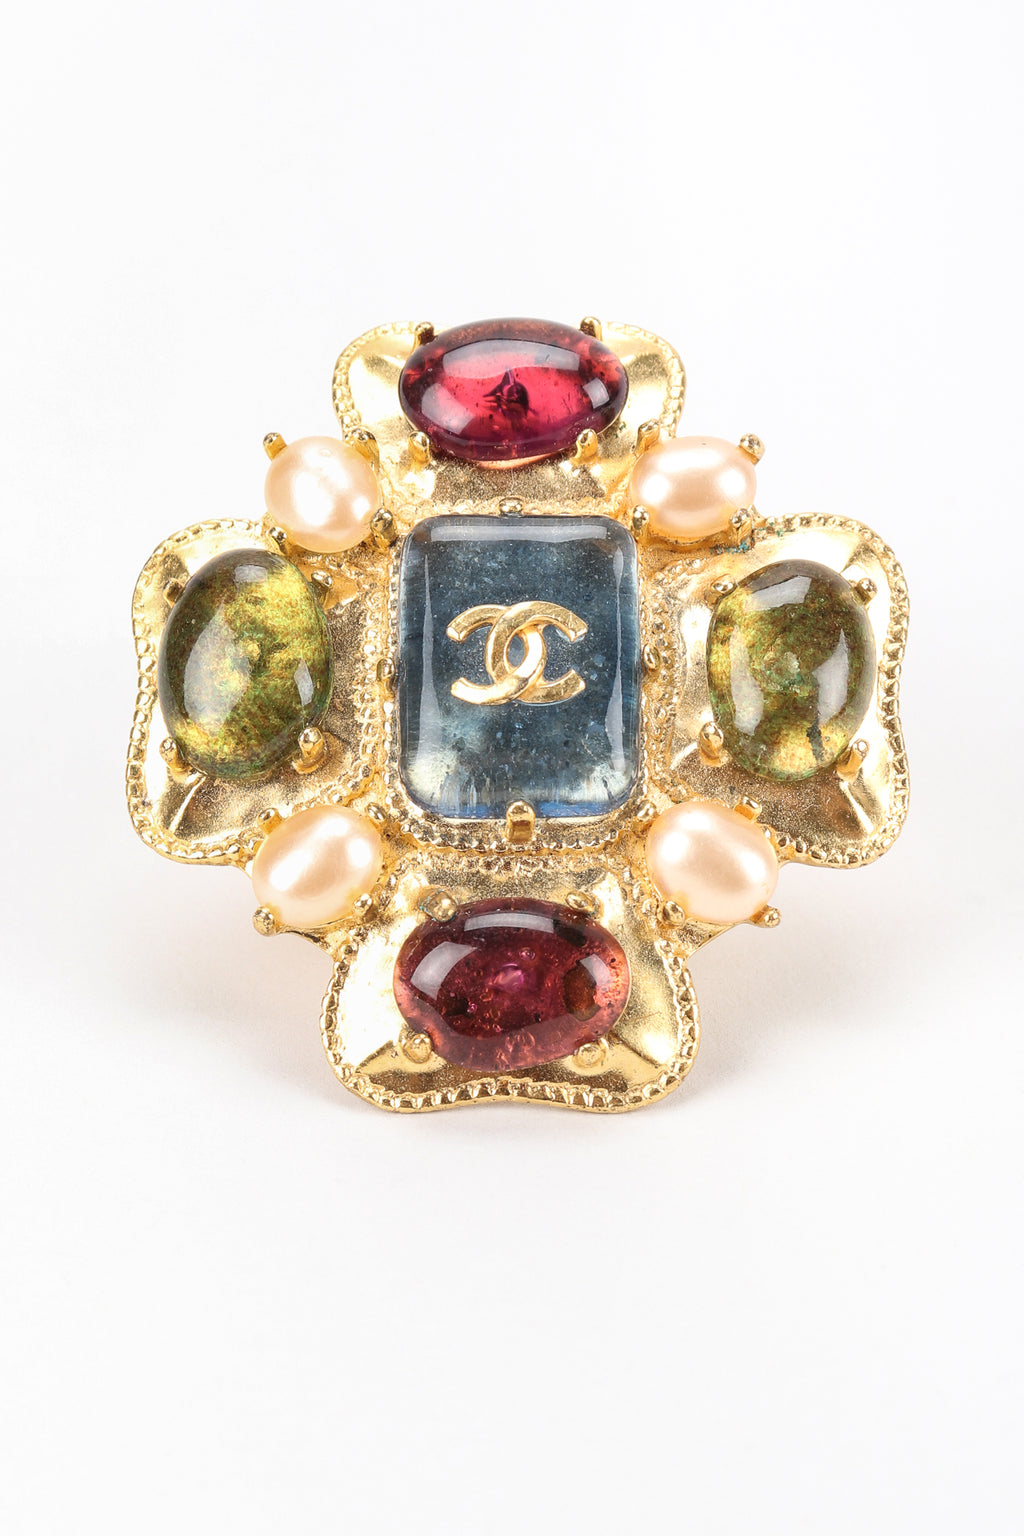 Chanel Gripoix glass & baroque pearls ring 2000 - Katheley's